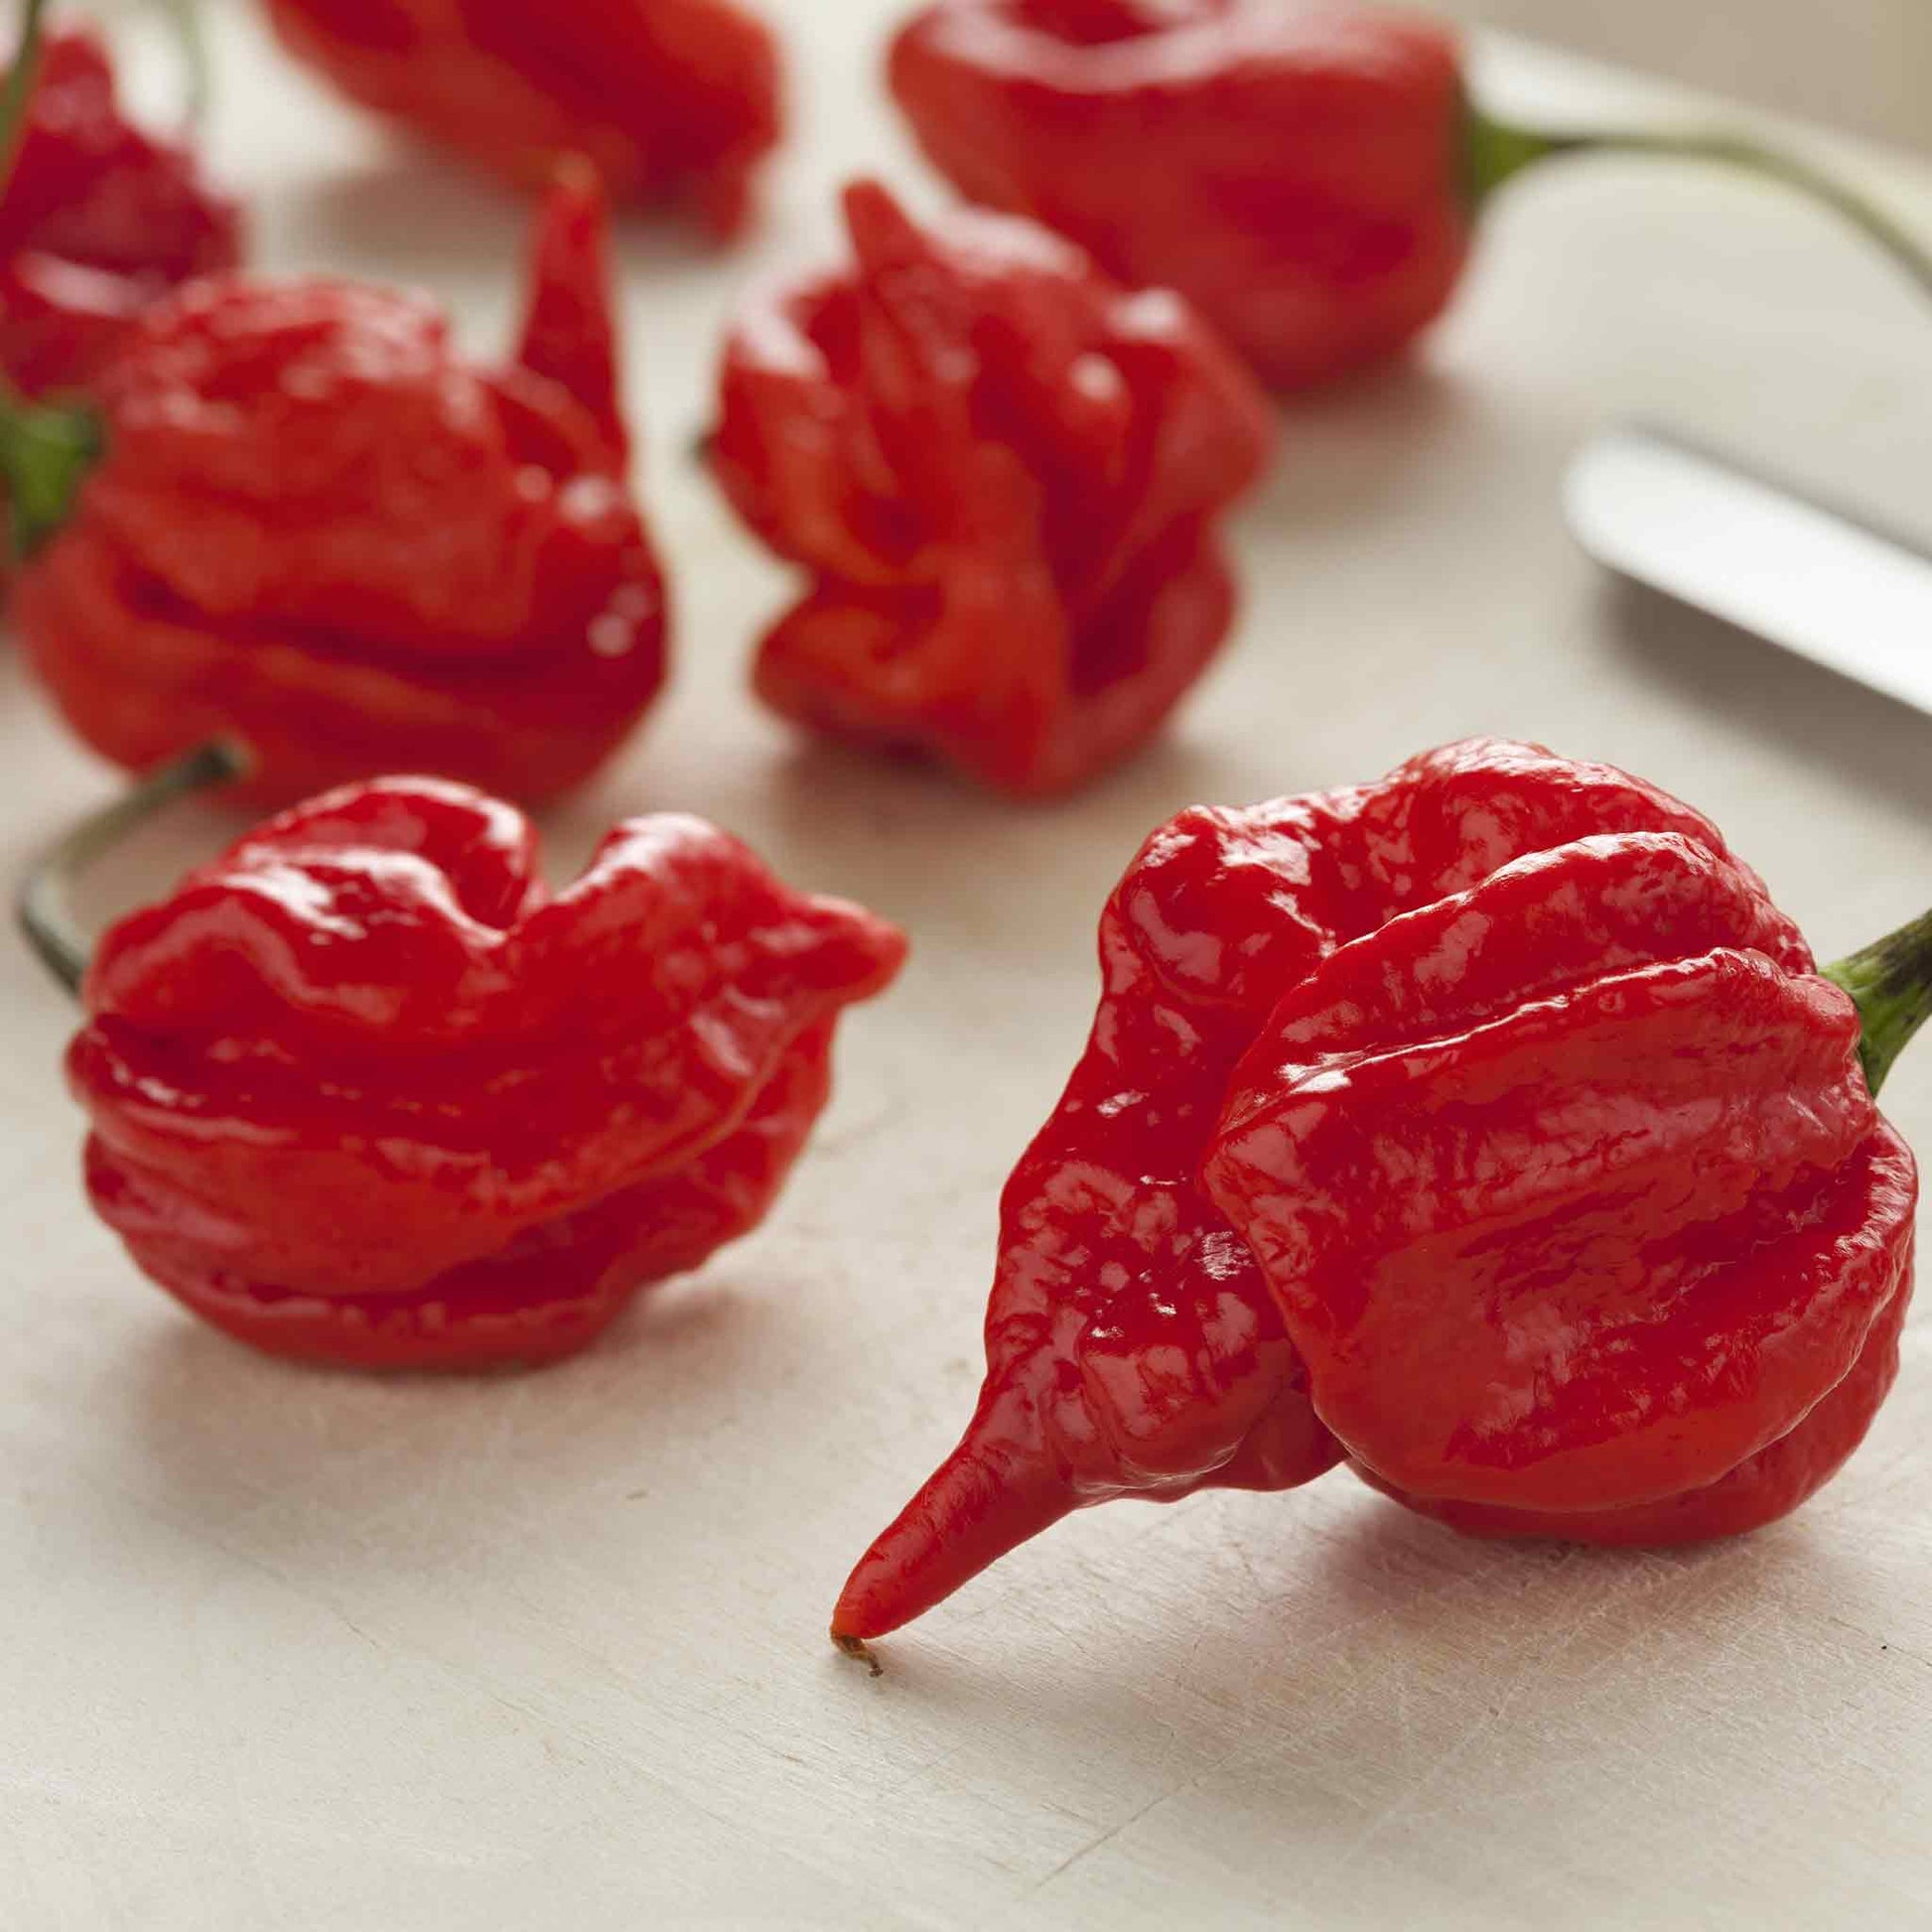 Hot Pepper Seeds - Trinidad Scorpion | Vegetable Seeds in Packets & Bulk | Eden Brothers